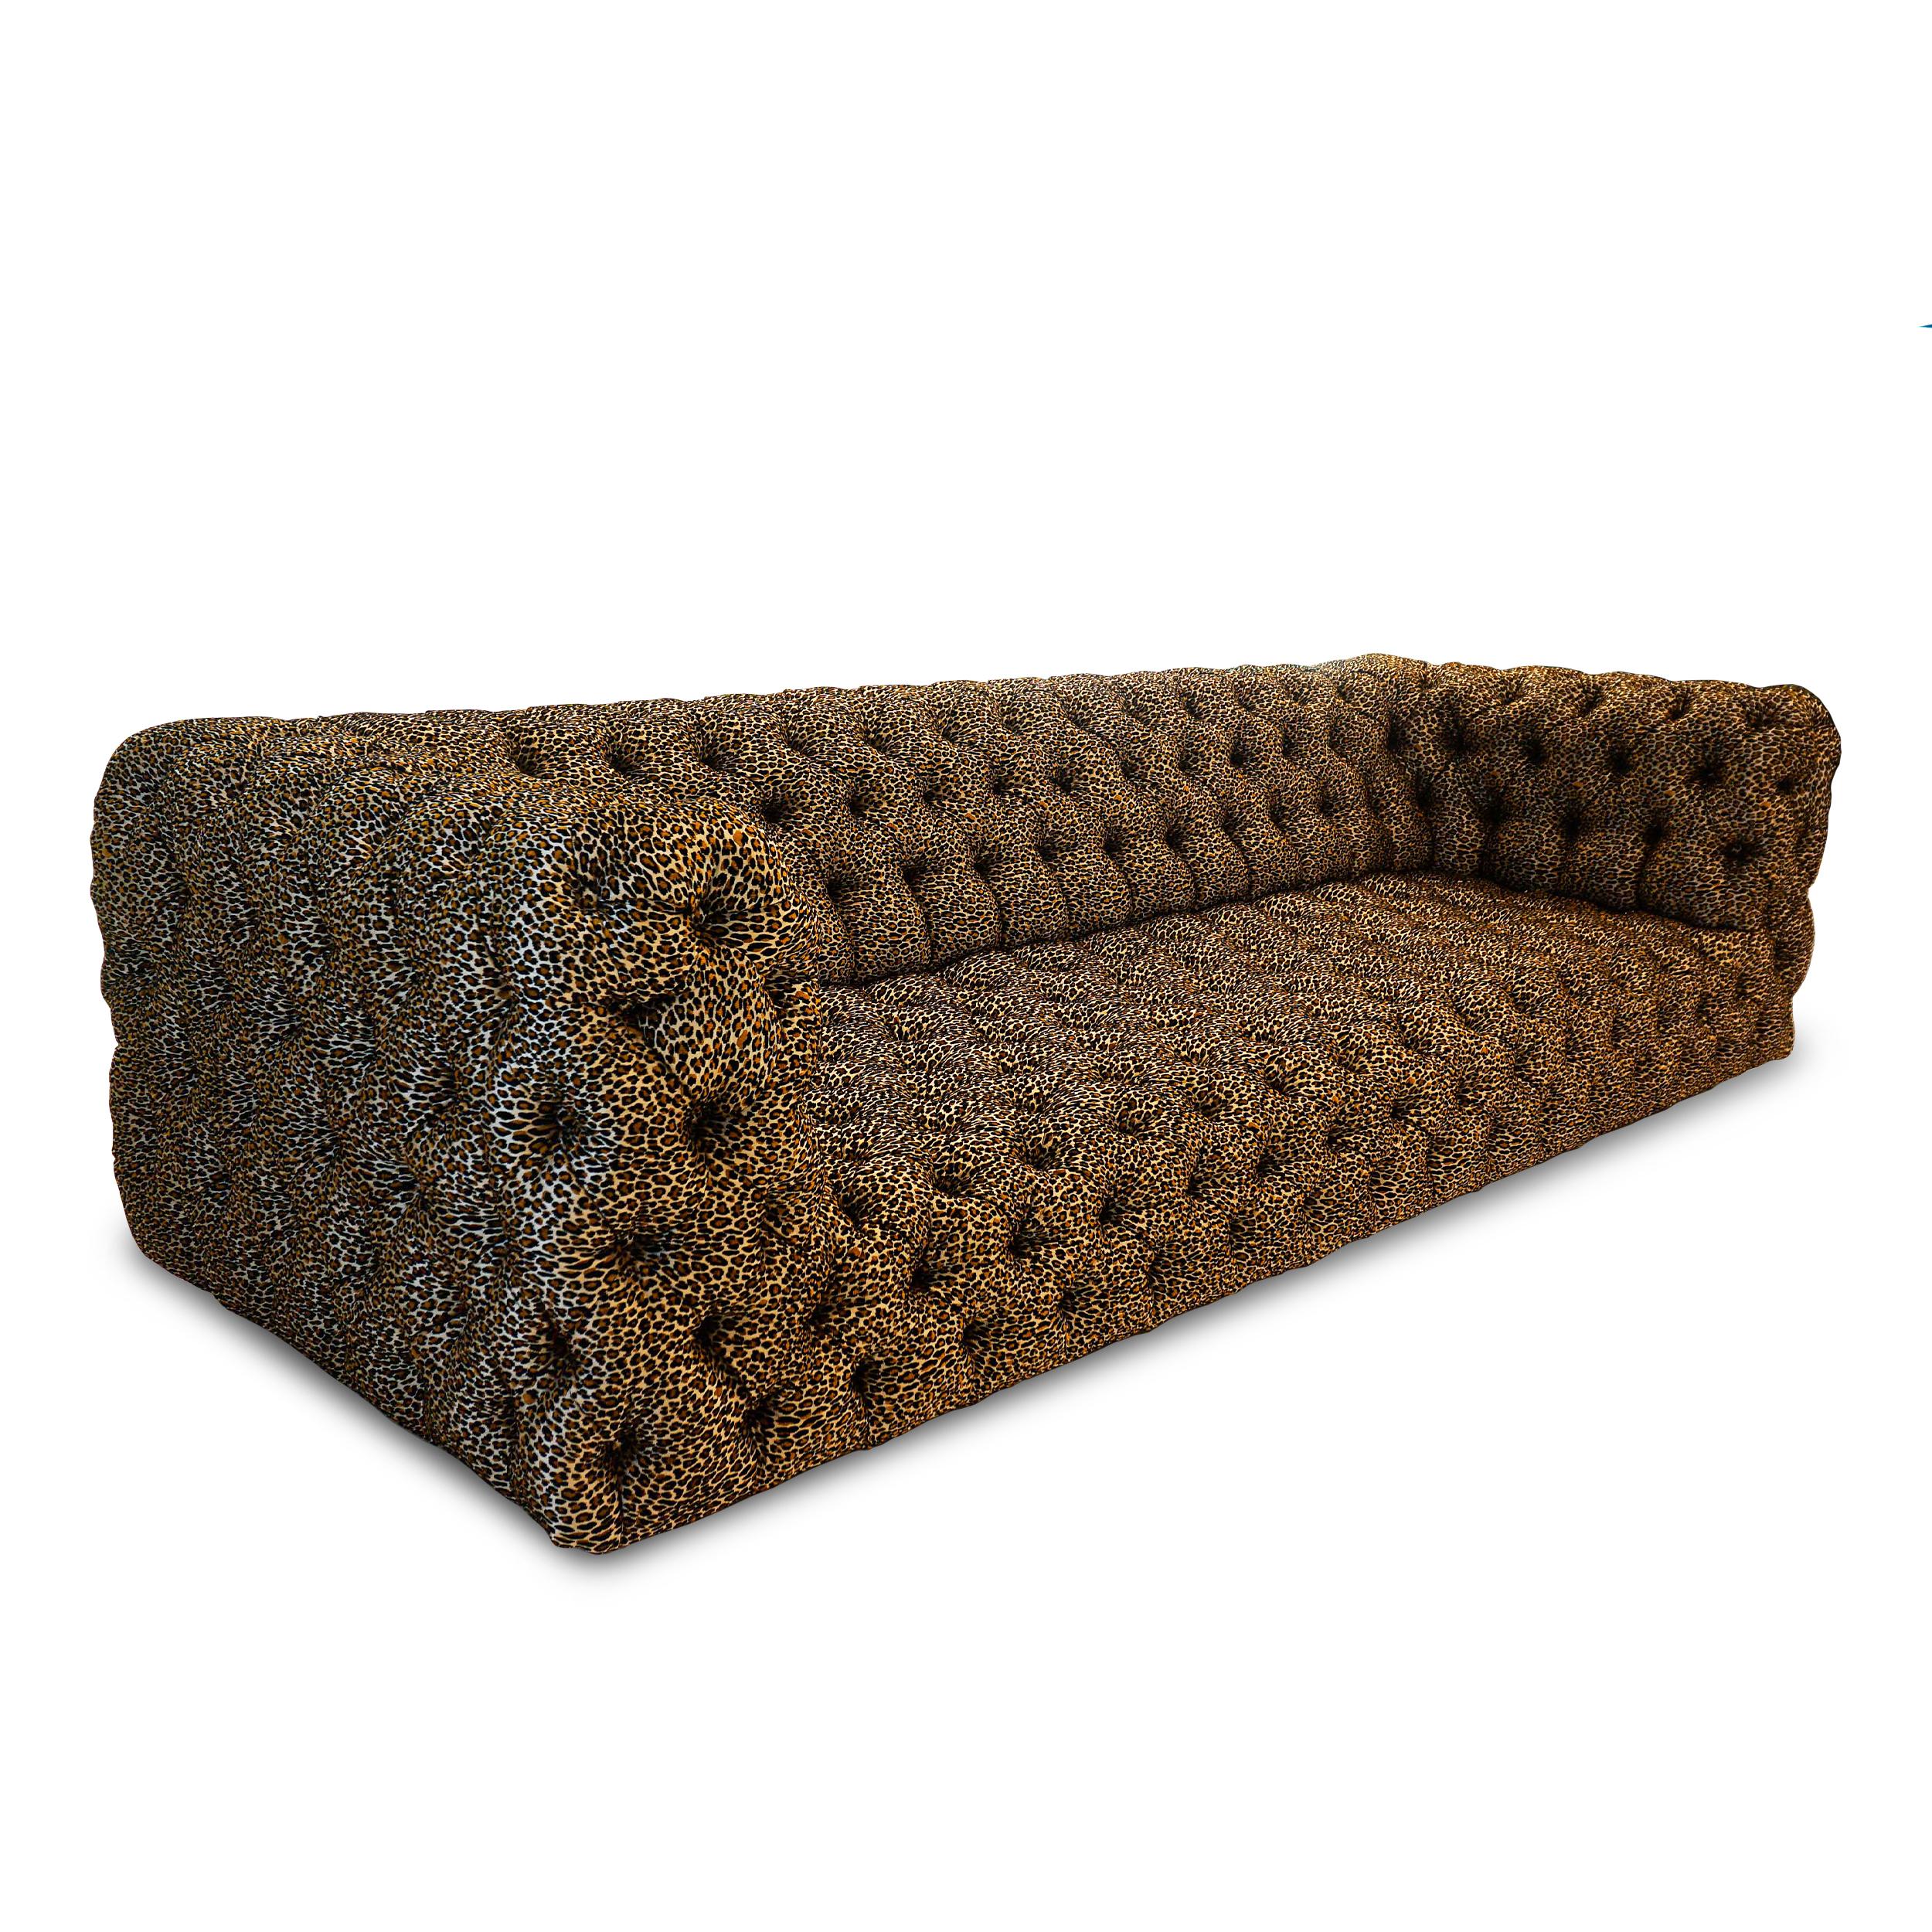 Tufted Sofa in a luxurious Mokum Textiles Leopardo Print Italian Jacquard Woven Chenille on a sateen ground. Frame is a solid hard maple. Seat cushion is made with 8-way hand tied springs. Entire body of sofa is a filled with cotton/dacron wrapped